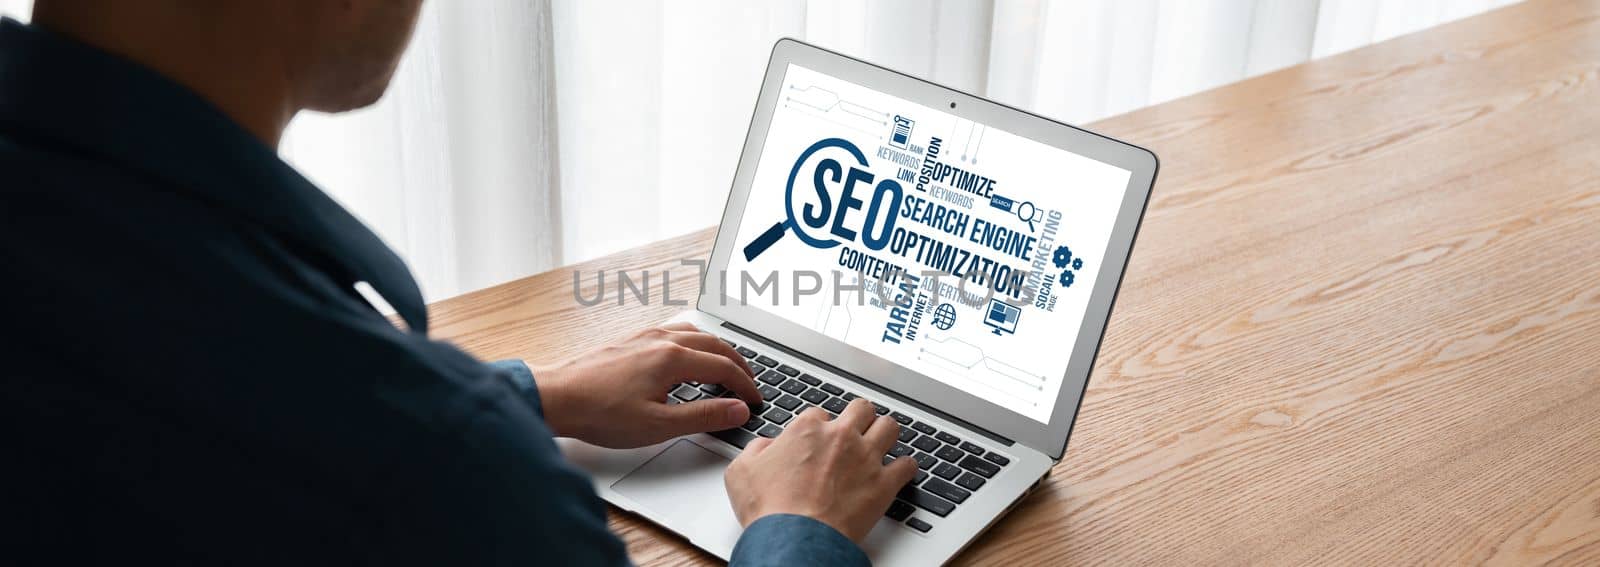 SEO search engine optimization for modish e-commerce and online retail business by biancoblue